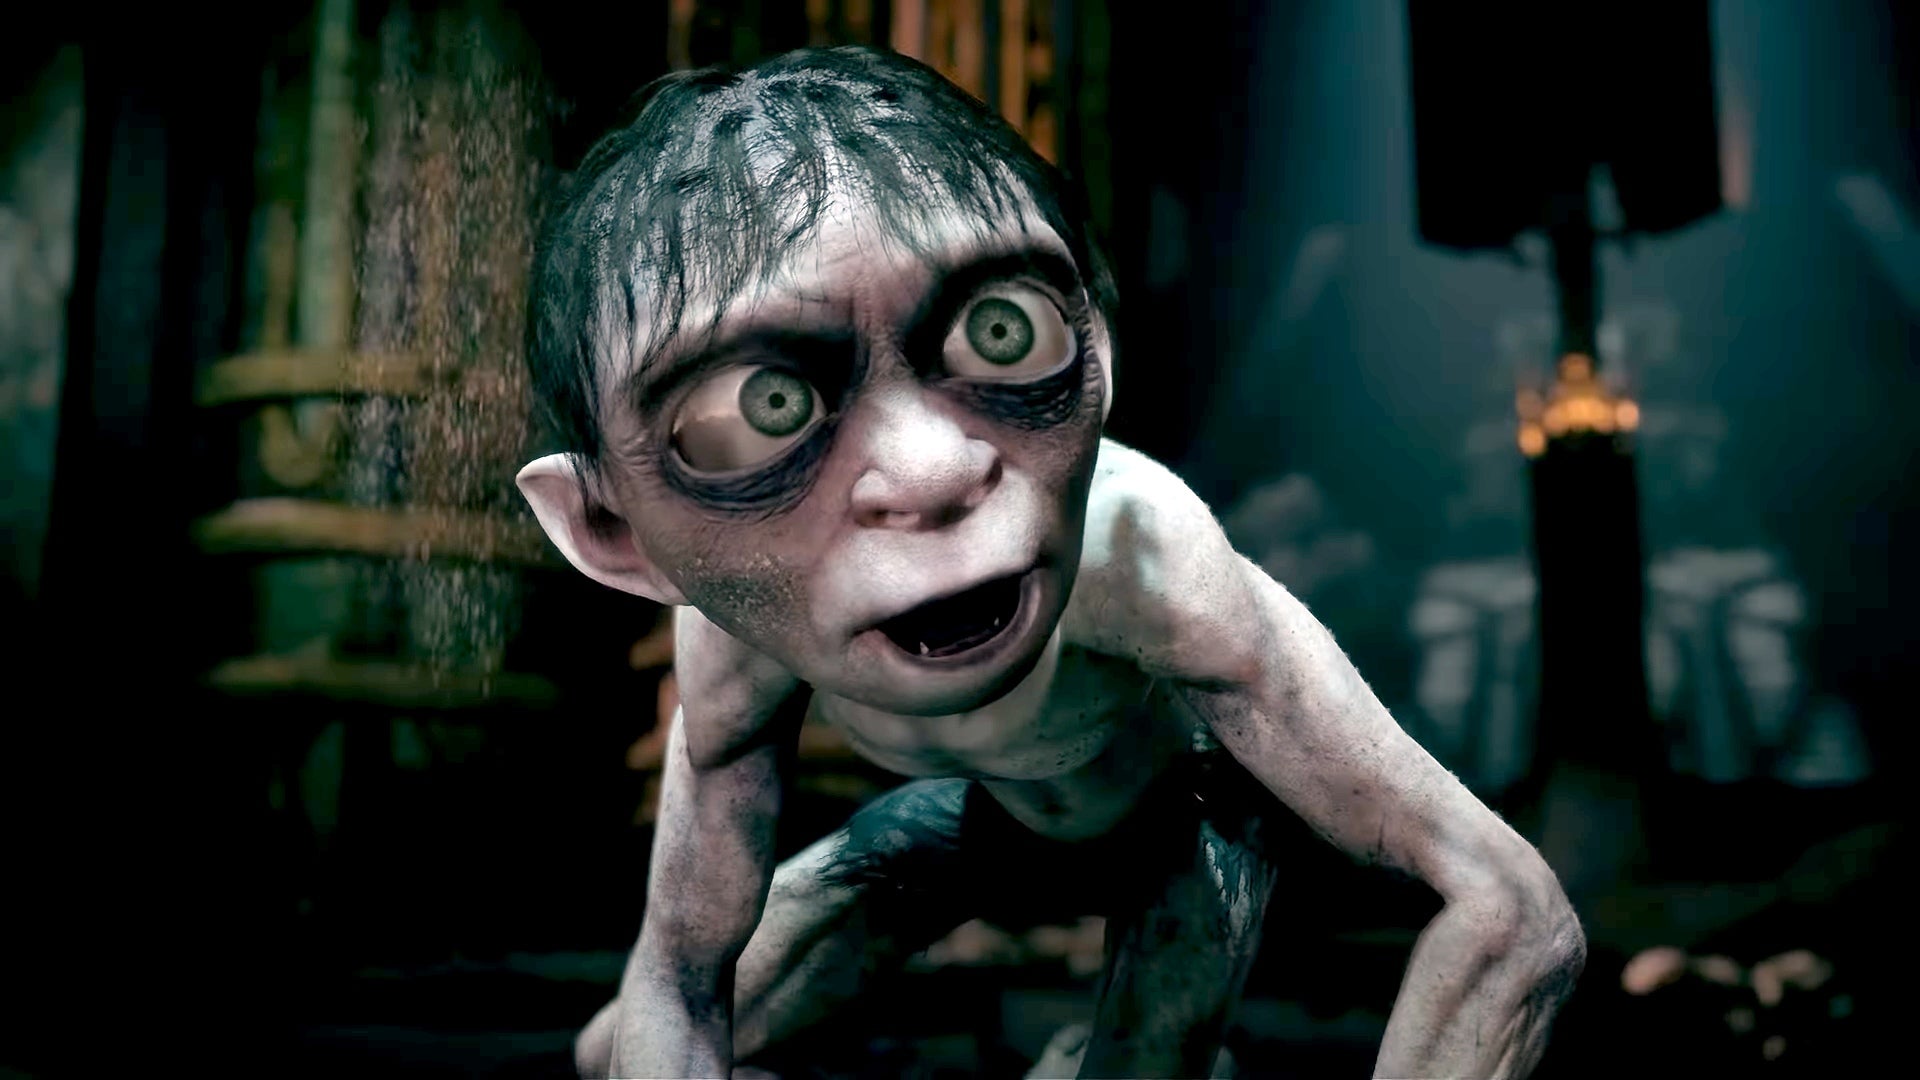 The Lord of the Rings: Gollum is the worst rated game of 2023 — Games  Enquirer